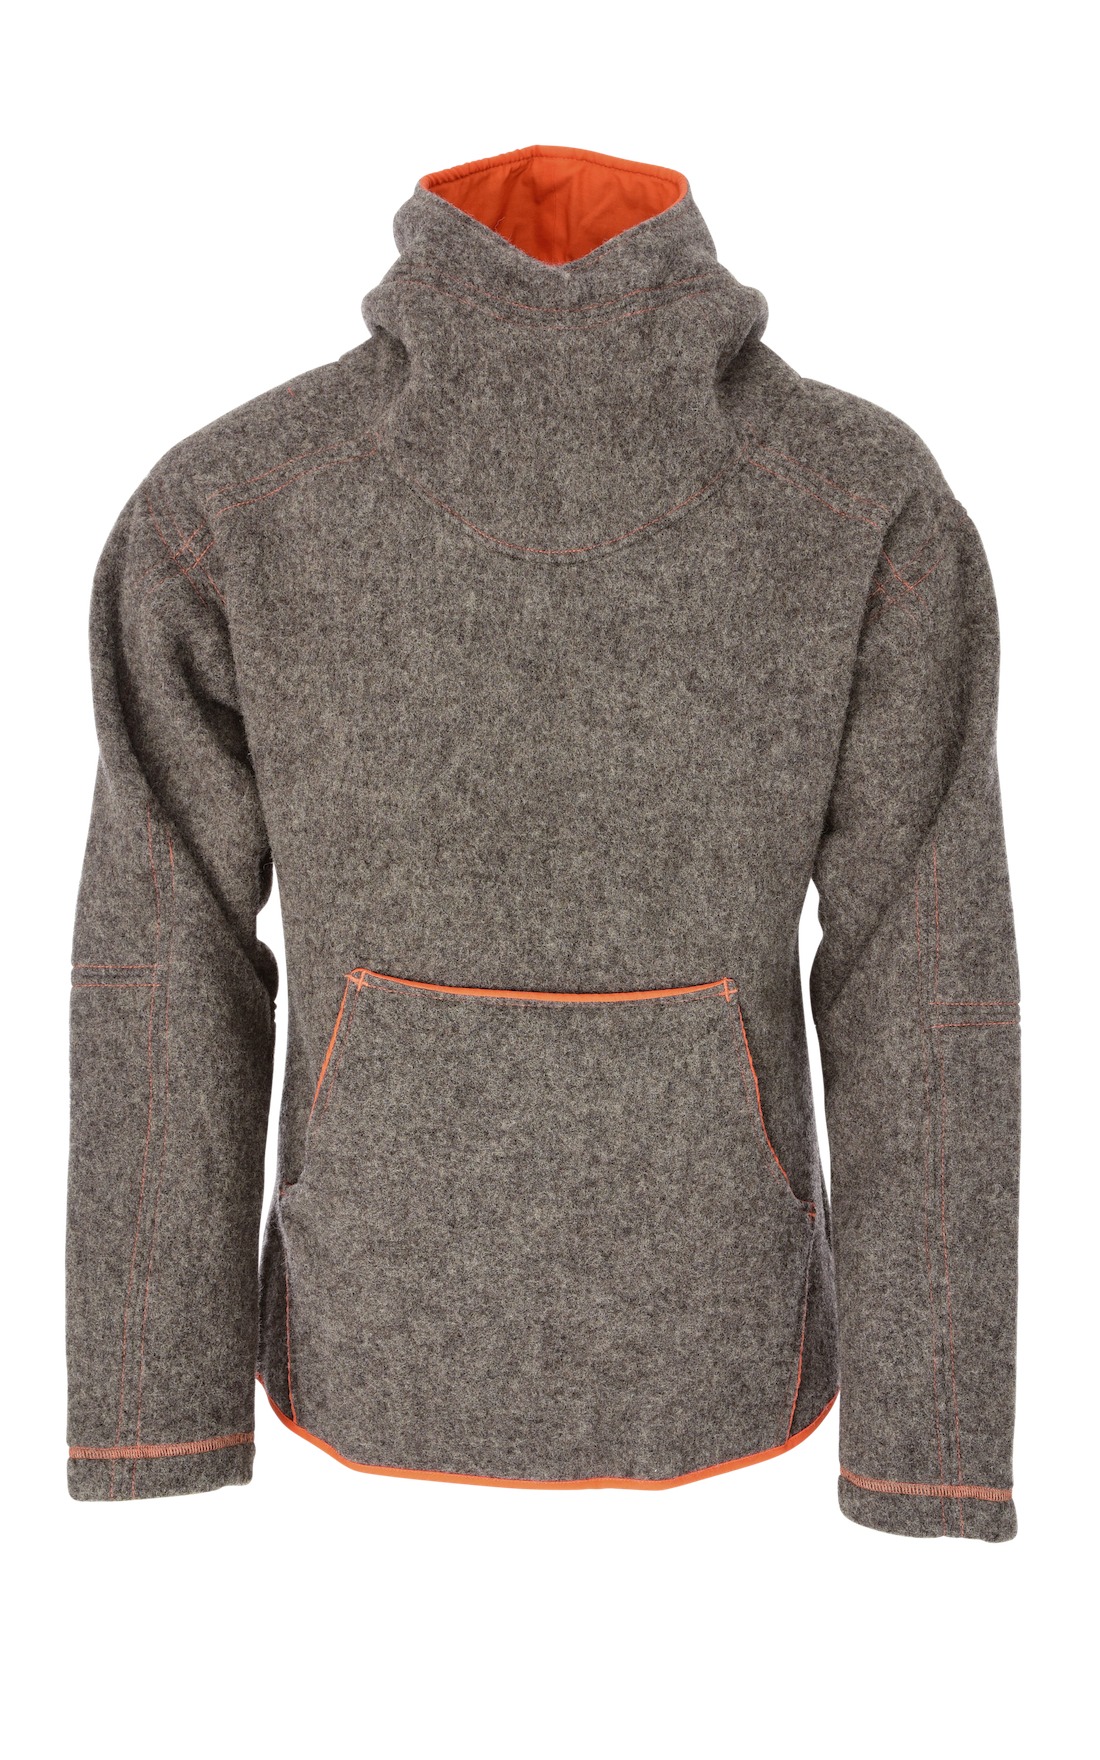 'Rugiewit is our first model for men. The elegant wool of the gray-wool pomeranian country sheep, a timeless cut and perfect workmanship make this sweater unique' - taken from the Nordwolle website